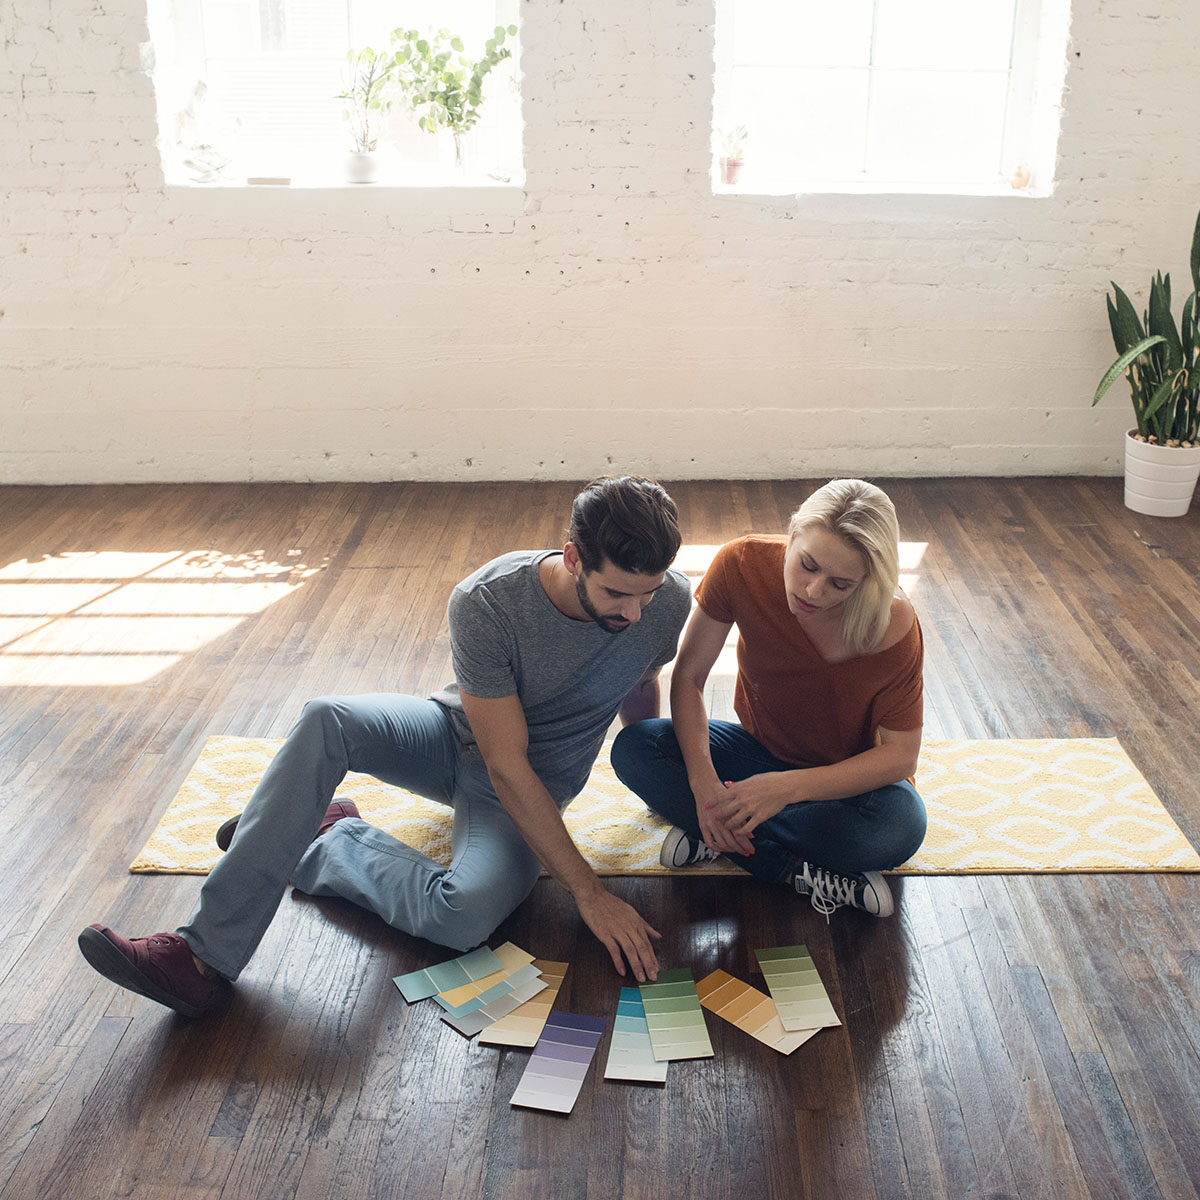 A couple sits together on their hardwood floors in an empty home going through colour samples.